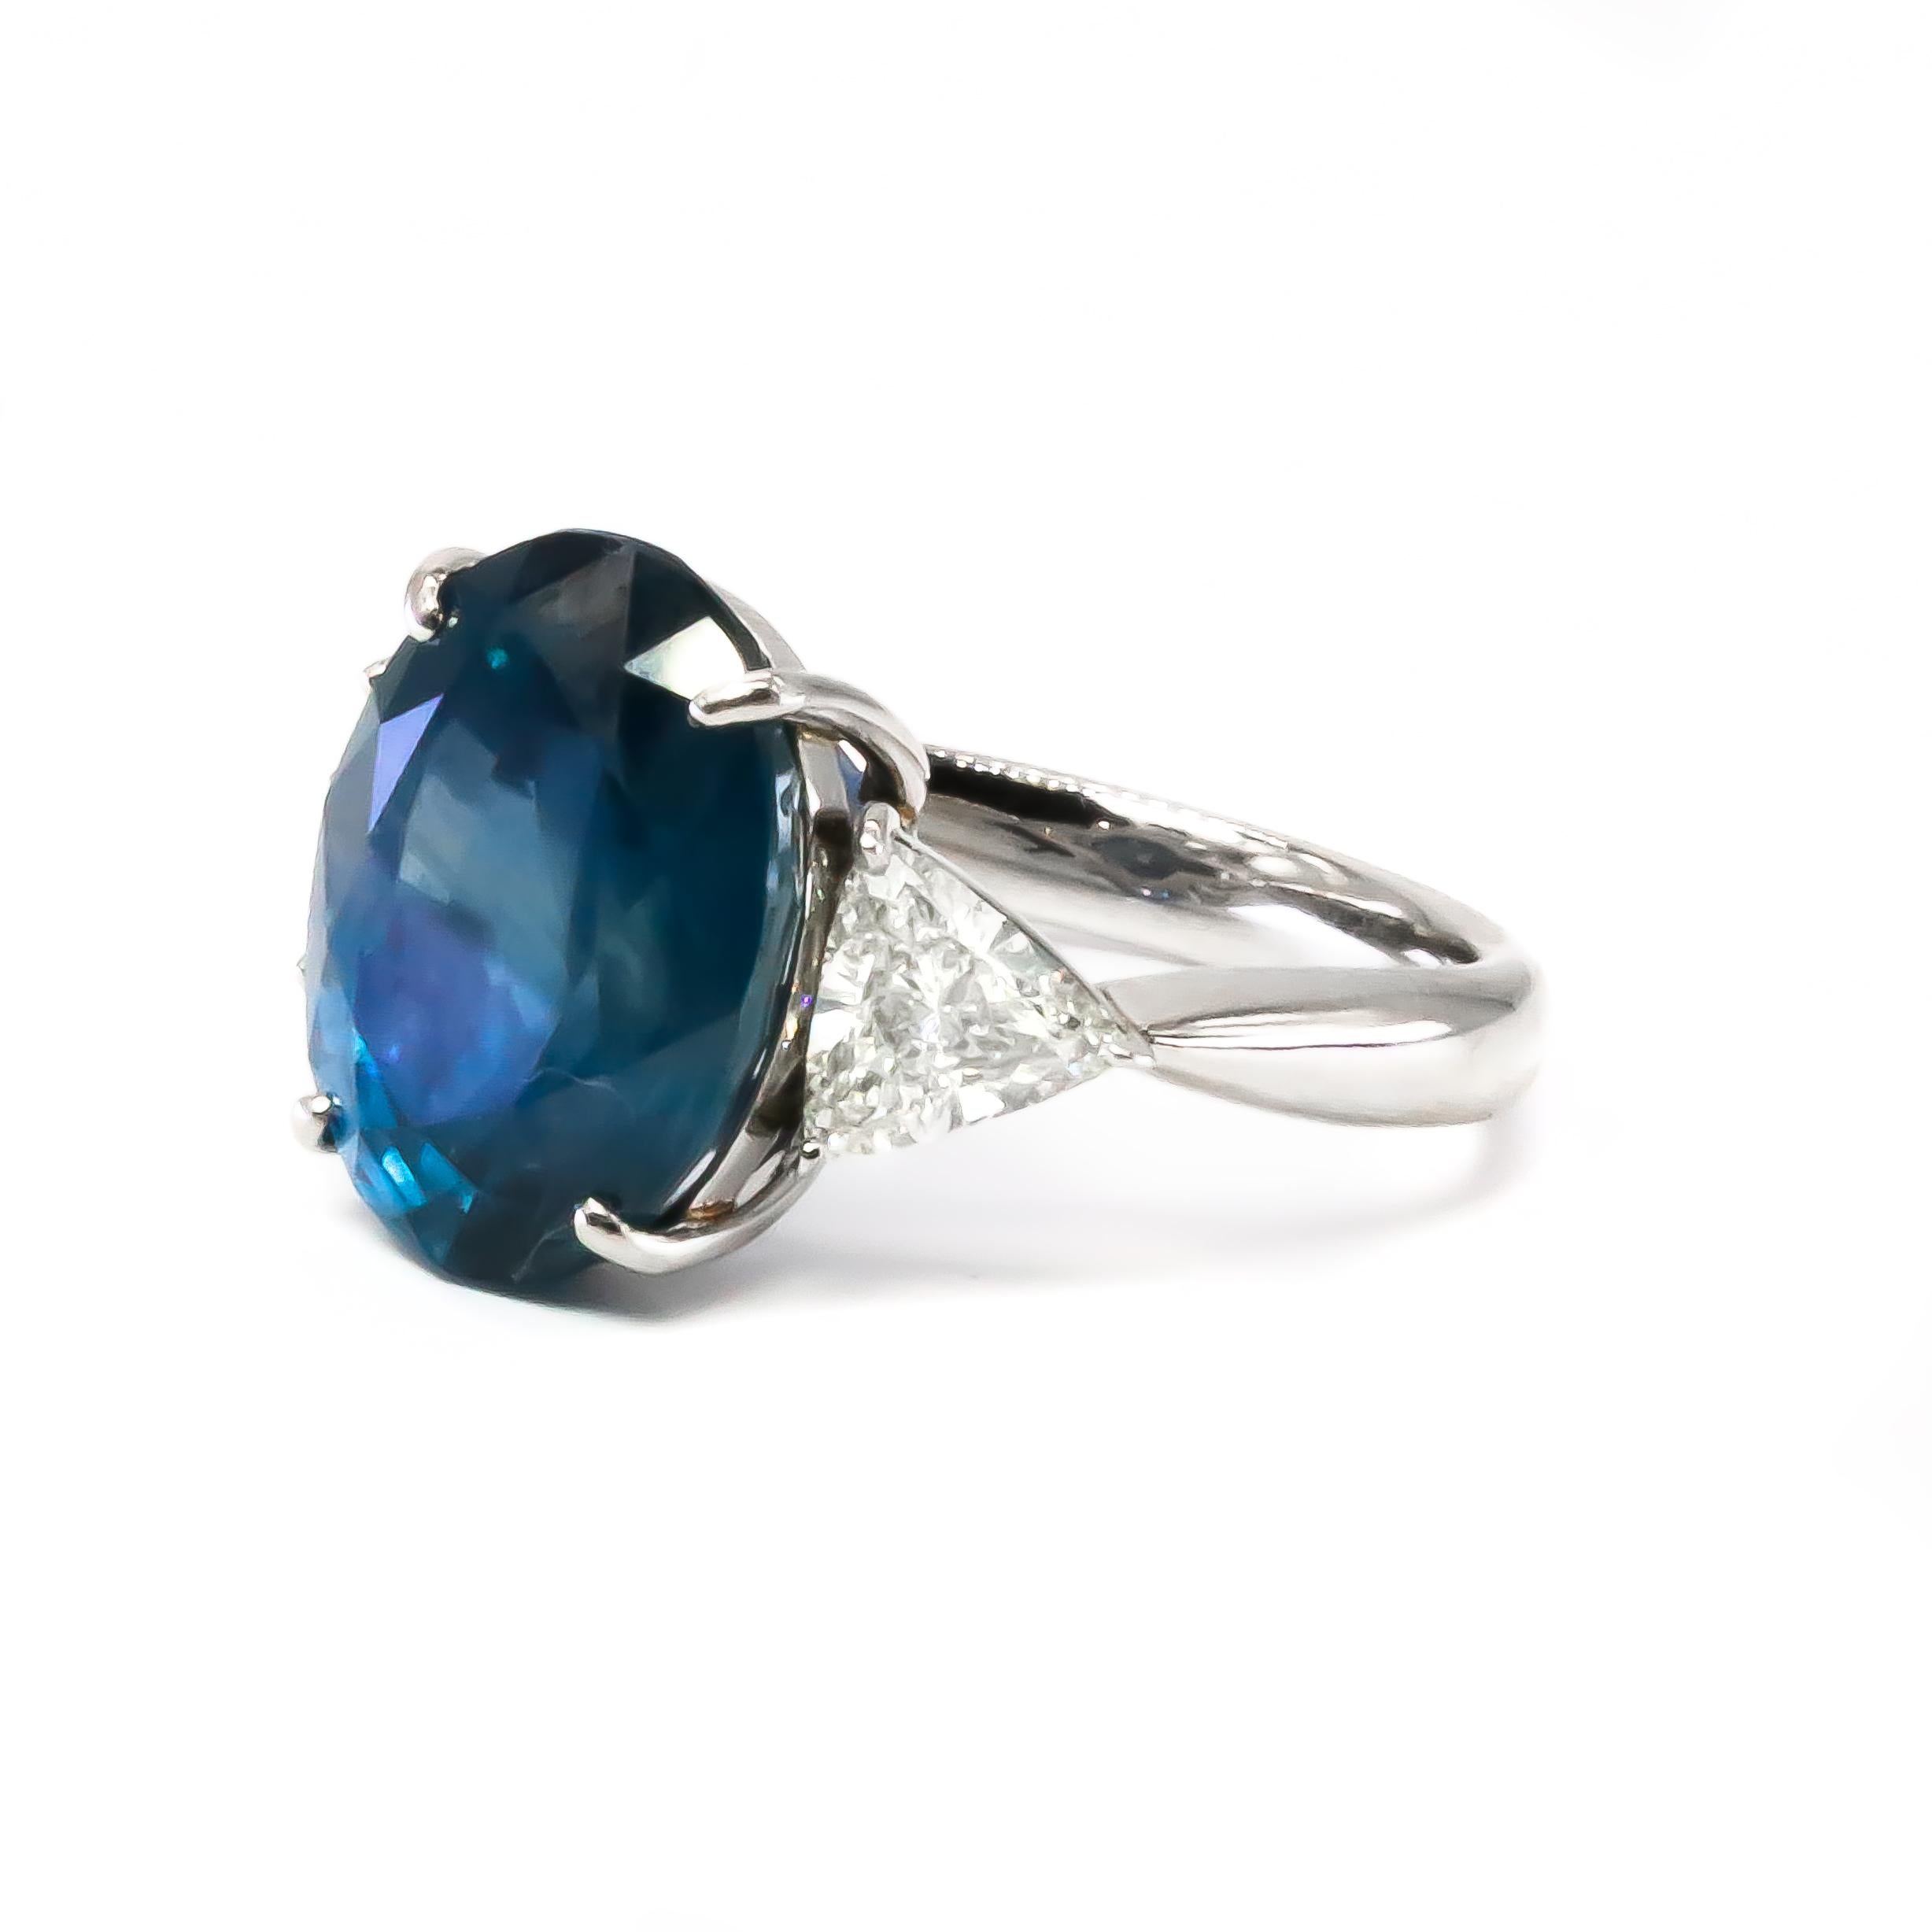 Oval Cut GIA Certified 12.72 Carat Natural Burma Blue Sapphire Ring Set With Diamonds 